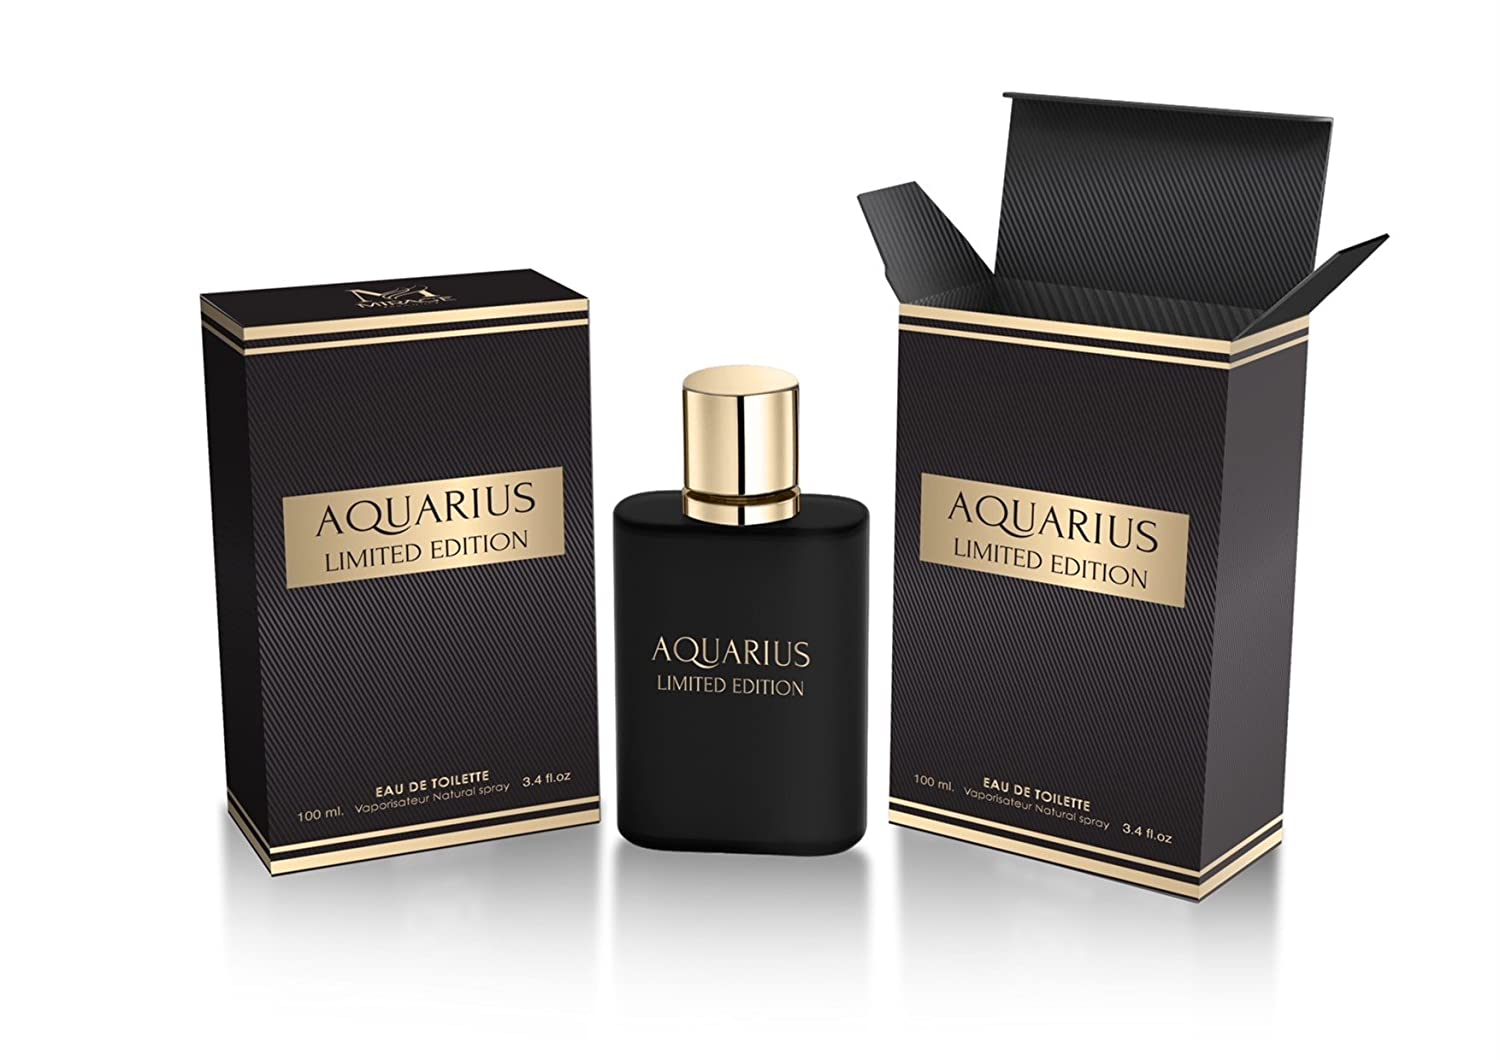 Mirage Brands Aquarius Limited Edition 3.4 Ounce EDT Men'S Cologne | Mirage Brands Is Not Associated in Any Way with Manufacturers, Distributors or Owners of the Original Fragrance Mentioned